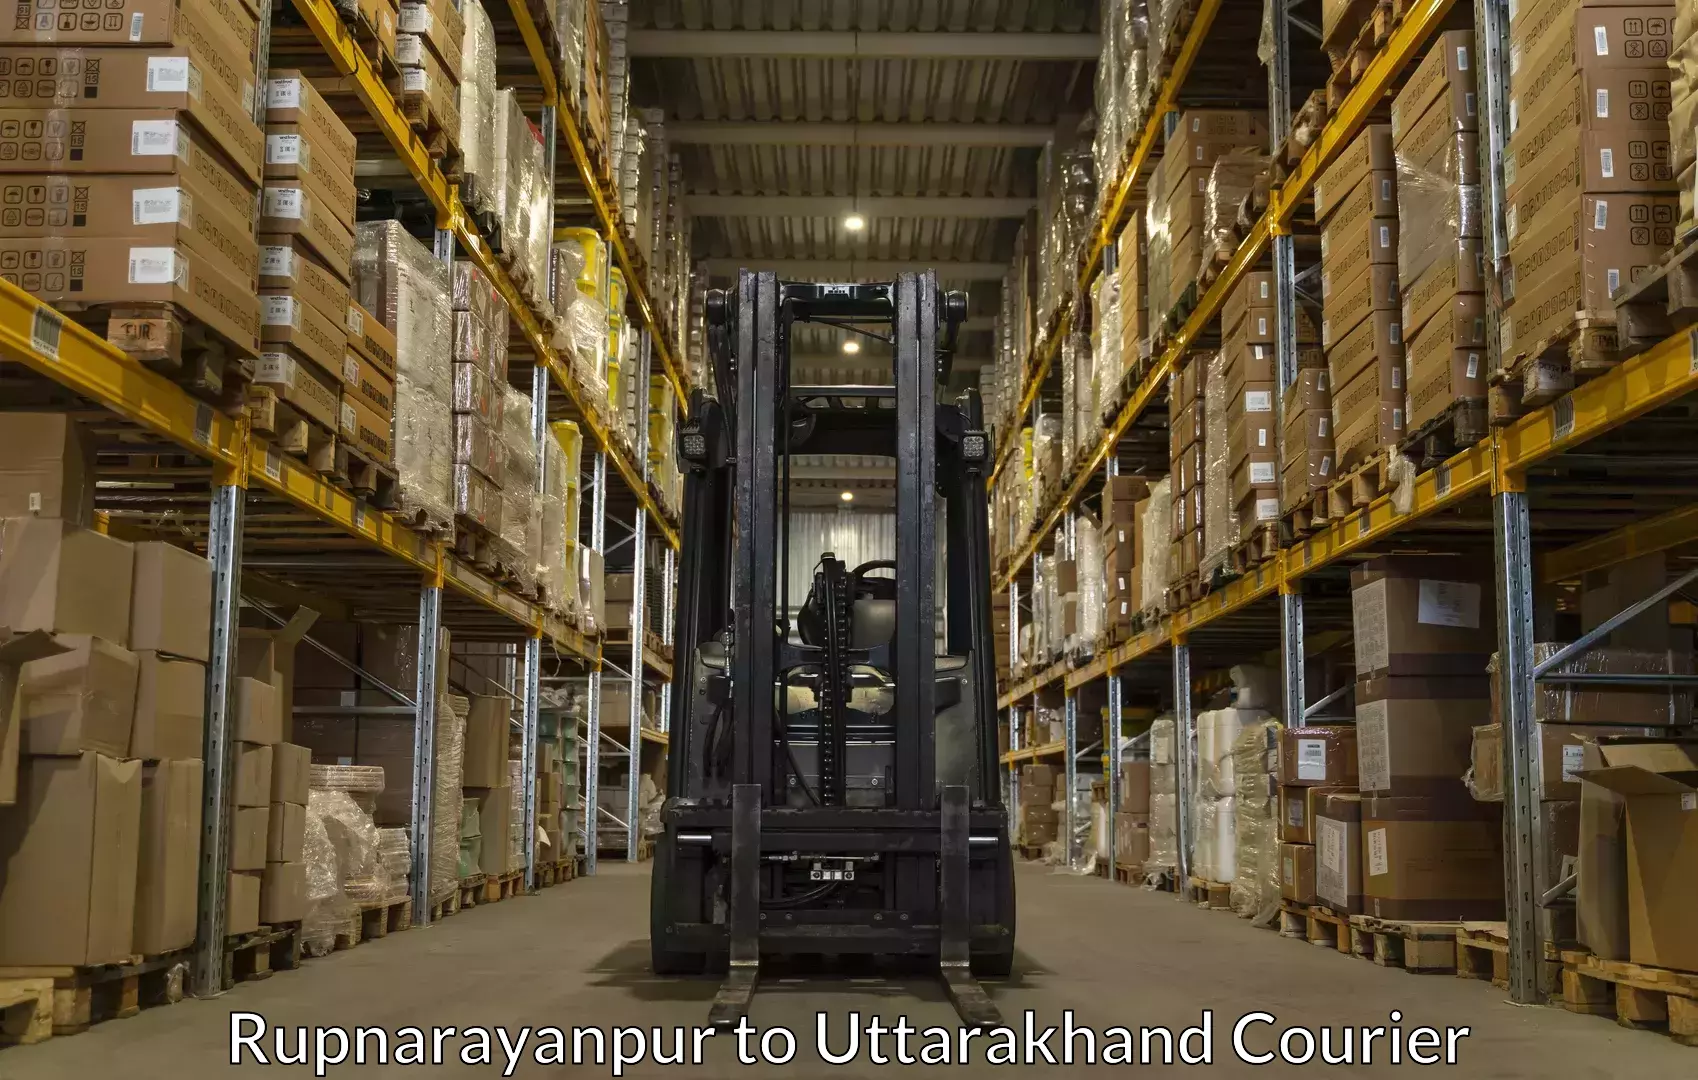 Luggage transport consultancy Rupnarayanpur to Rudrapur